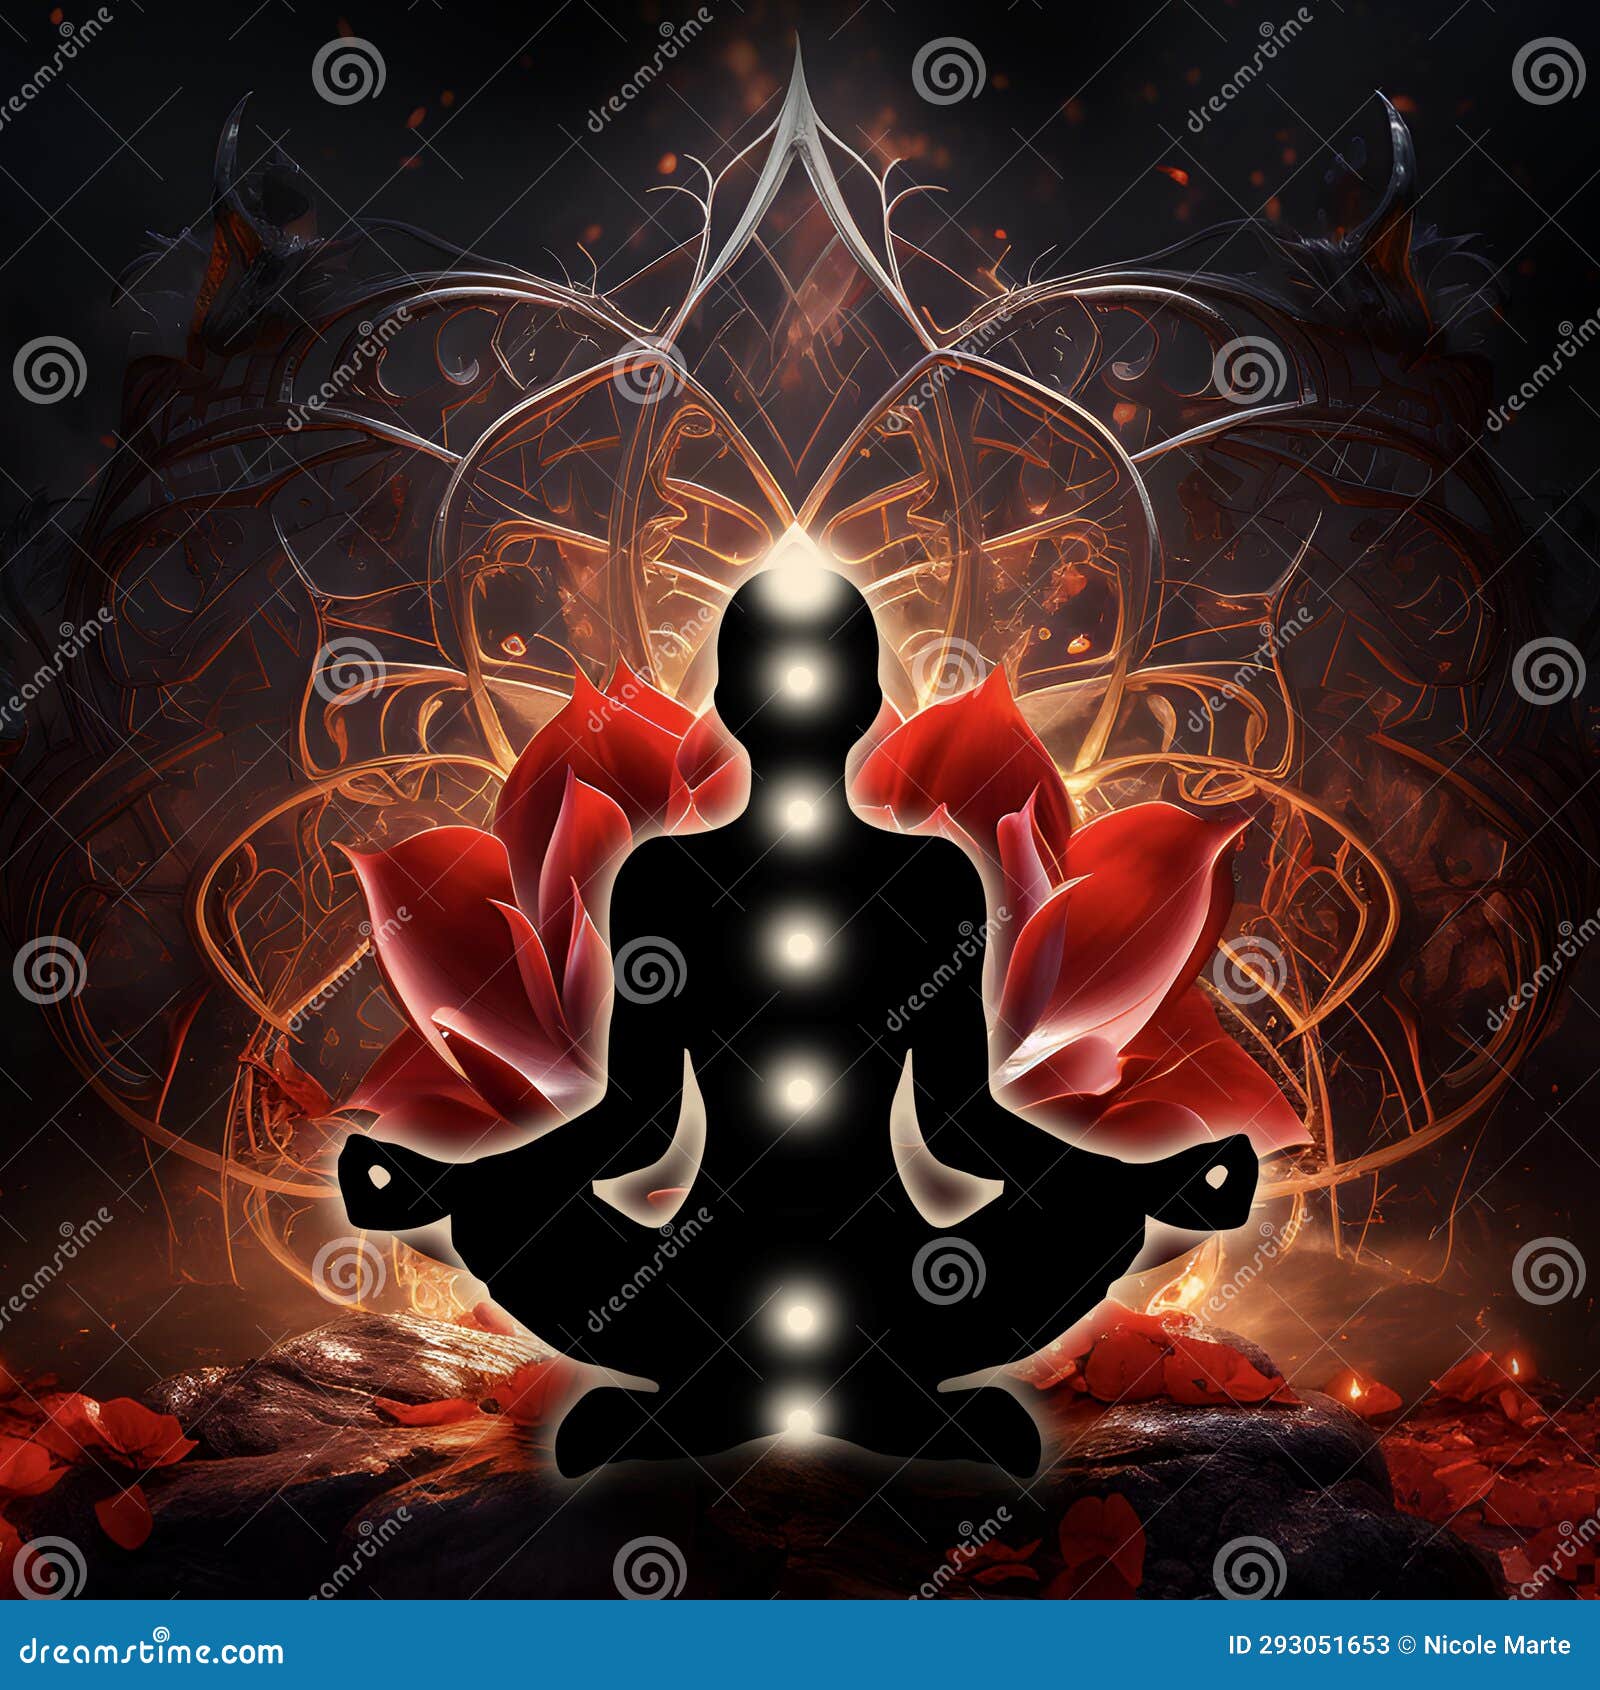 All about the Root Chakra - Explanations, Advice